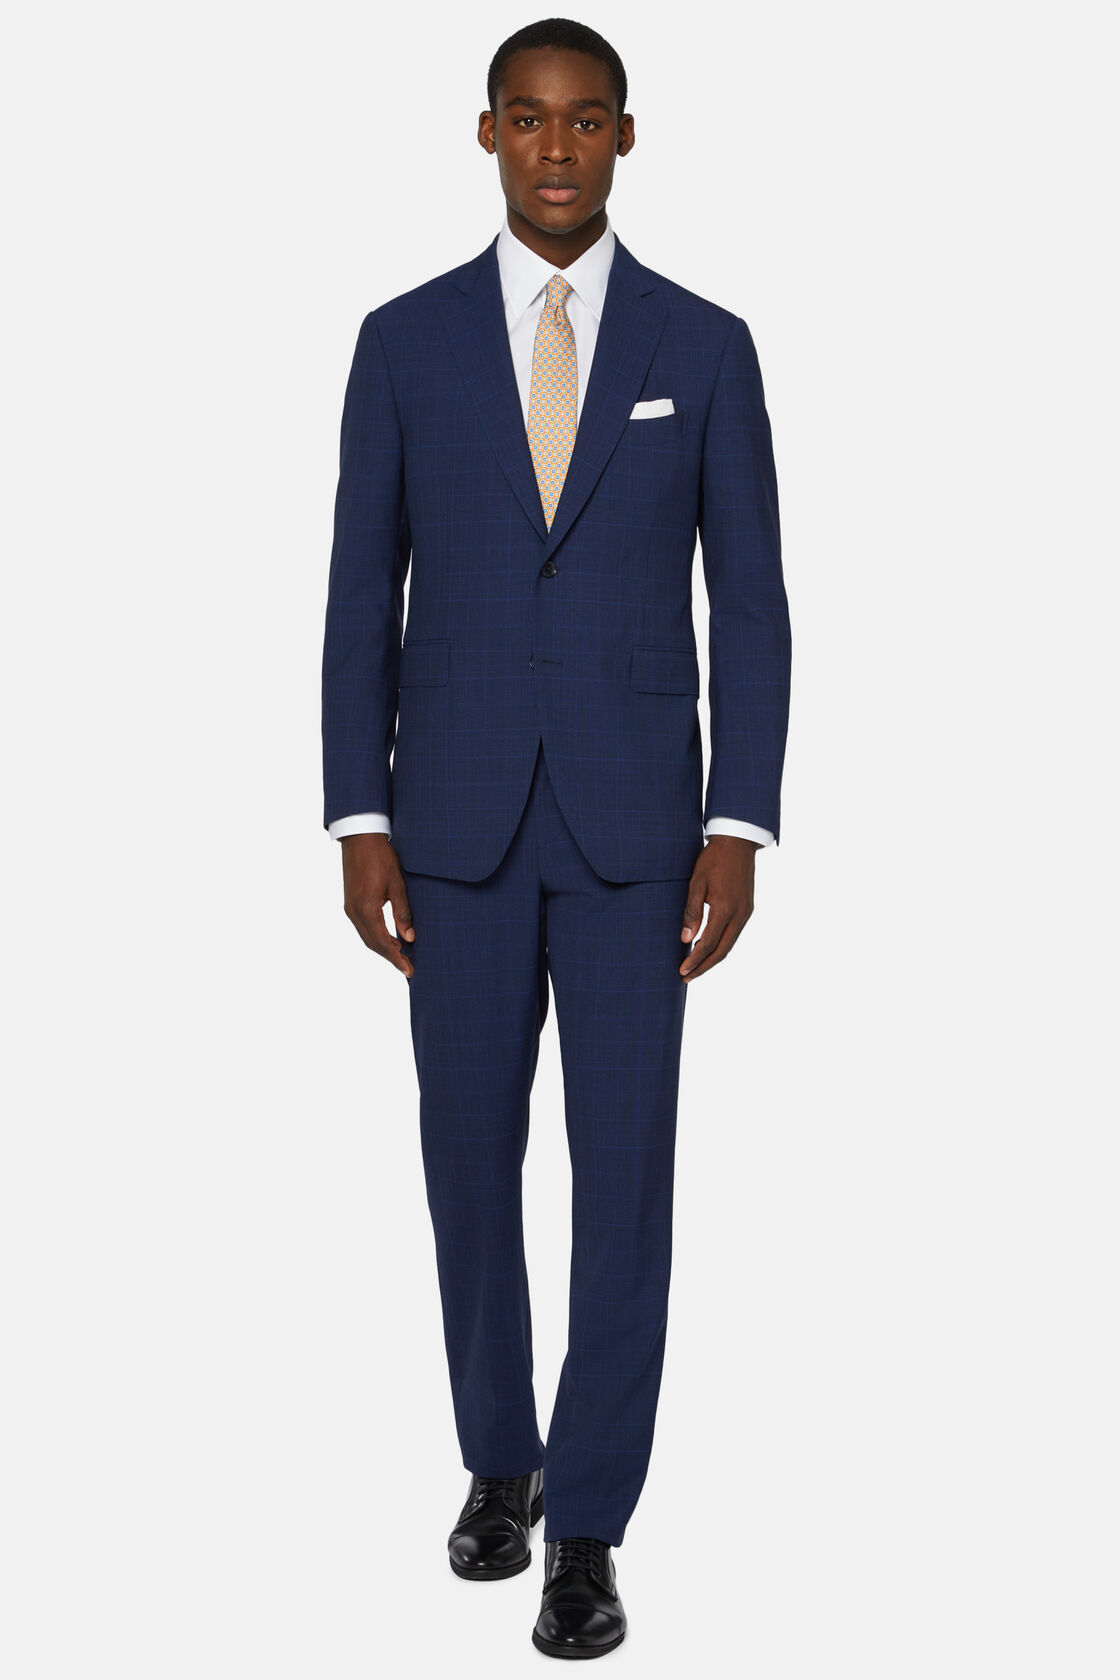 Navy Blue Prince of Wales Check Suit In Super 130 Wool, Navy blue, hi-res